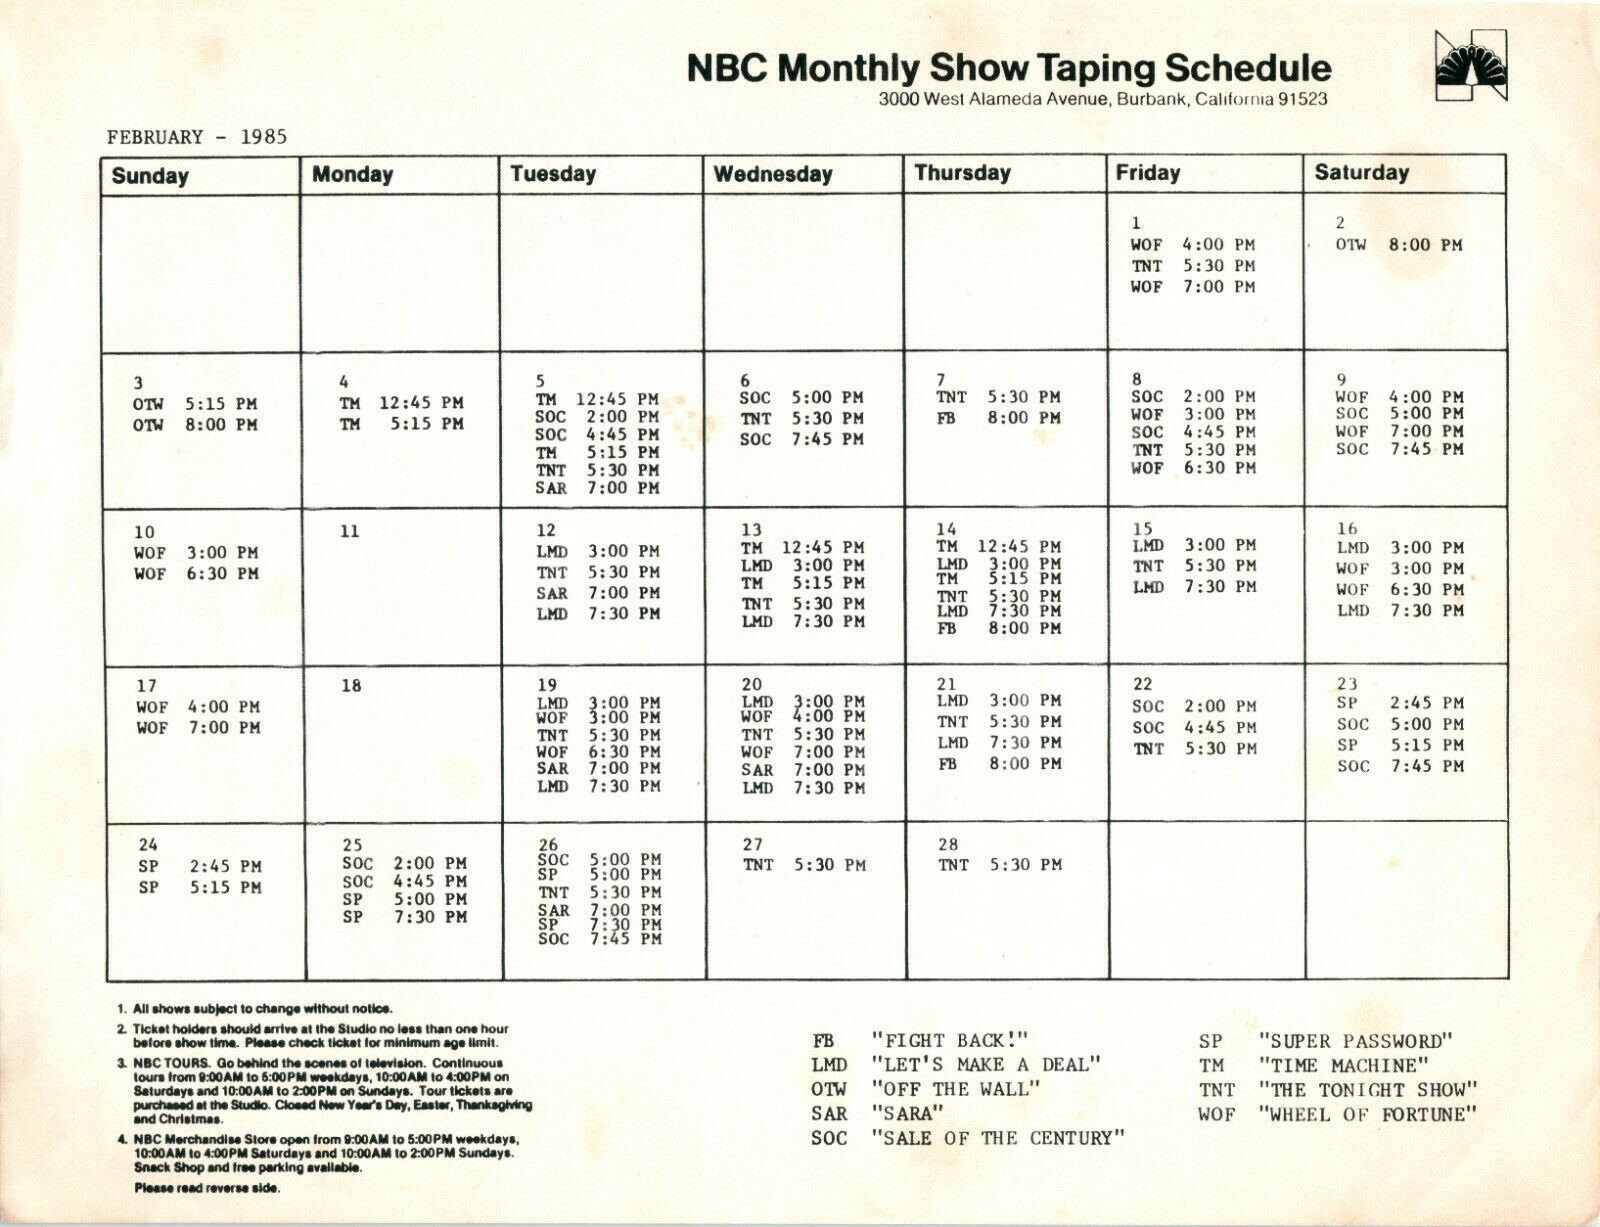 https://vignette.wikia.nocookie.net/markgoodson/images/5/58/NBC_February_1985_Taping_Schedule.jpg/revision/latest?cb=20201110205038&format=original